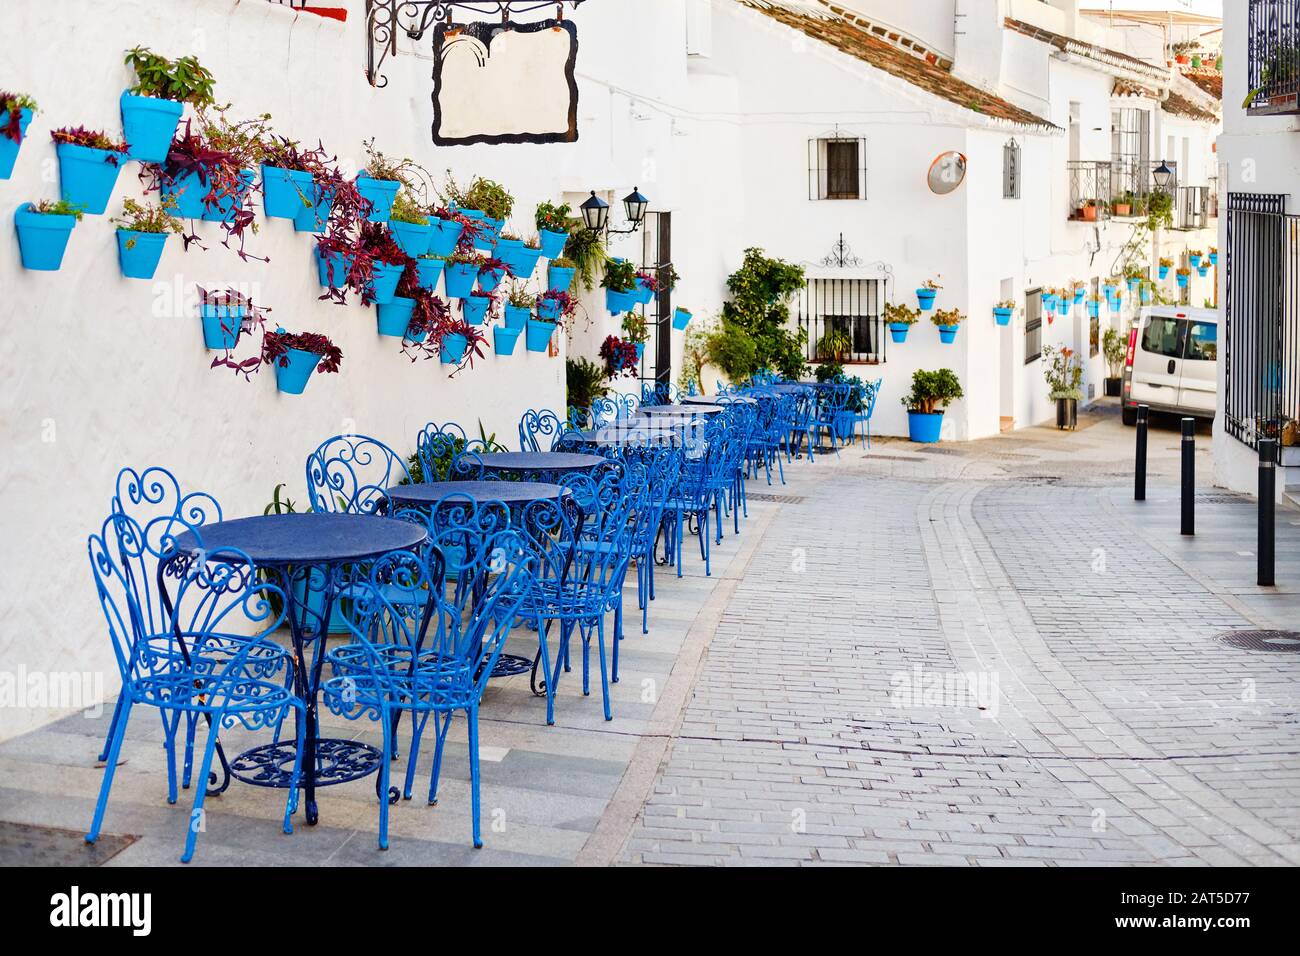 Mijas Pueblo Blanco, charming small village, picturesque empty street in old town with bright blue tables chairs of local cafe, flower pots hanging on Stock Photo